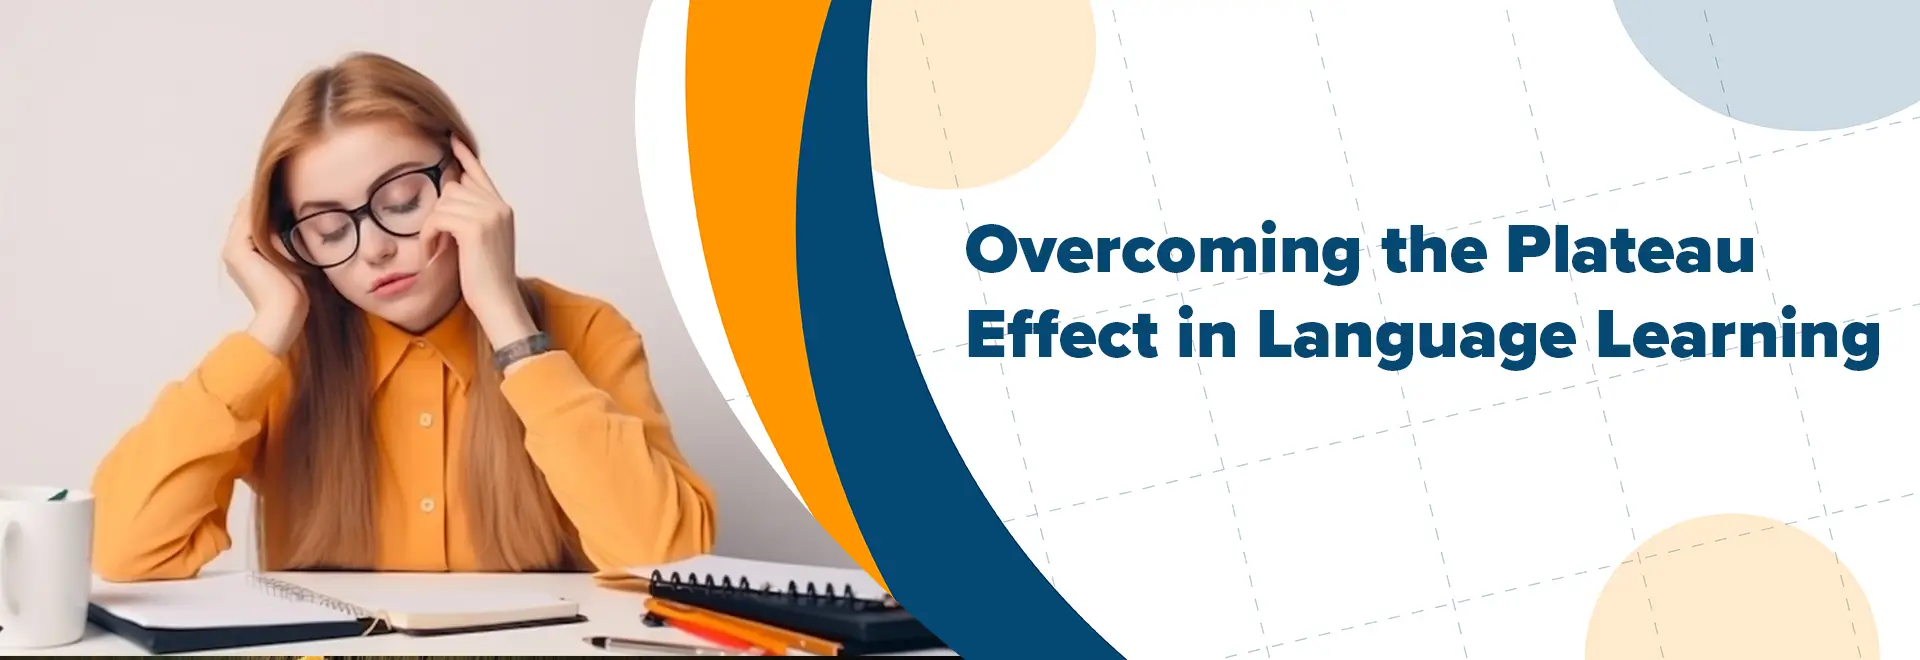 Tips to Overcome the Plateau Effect in Language Learning​